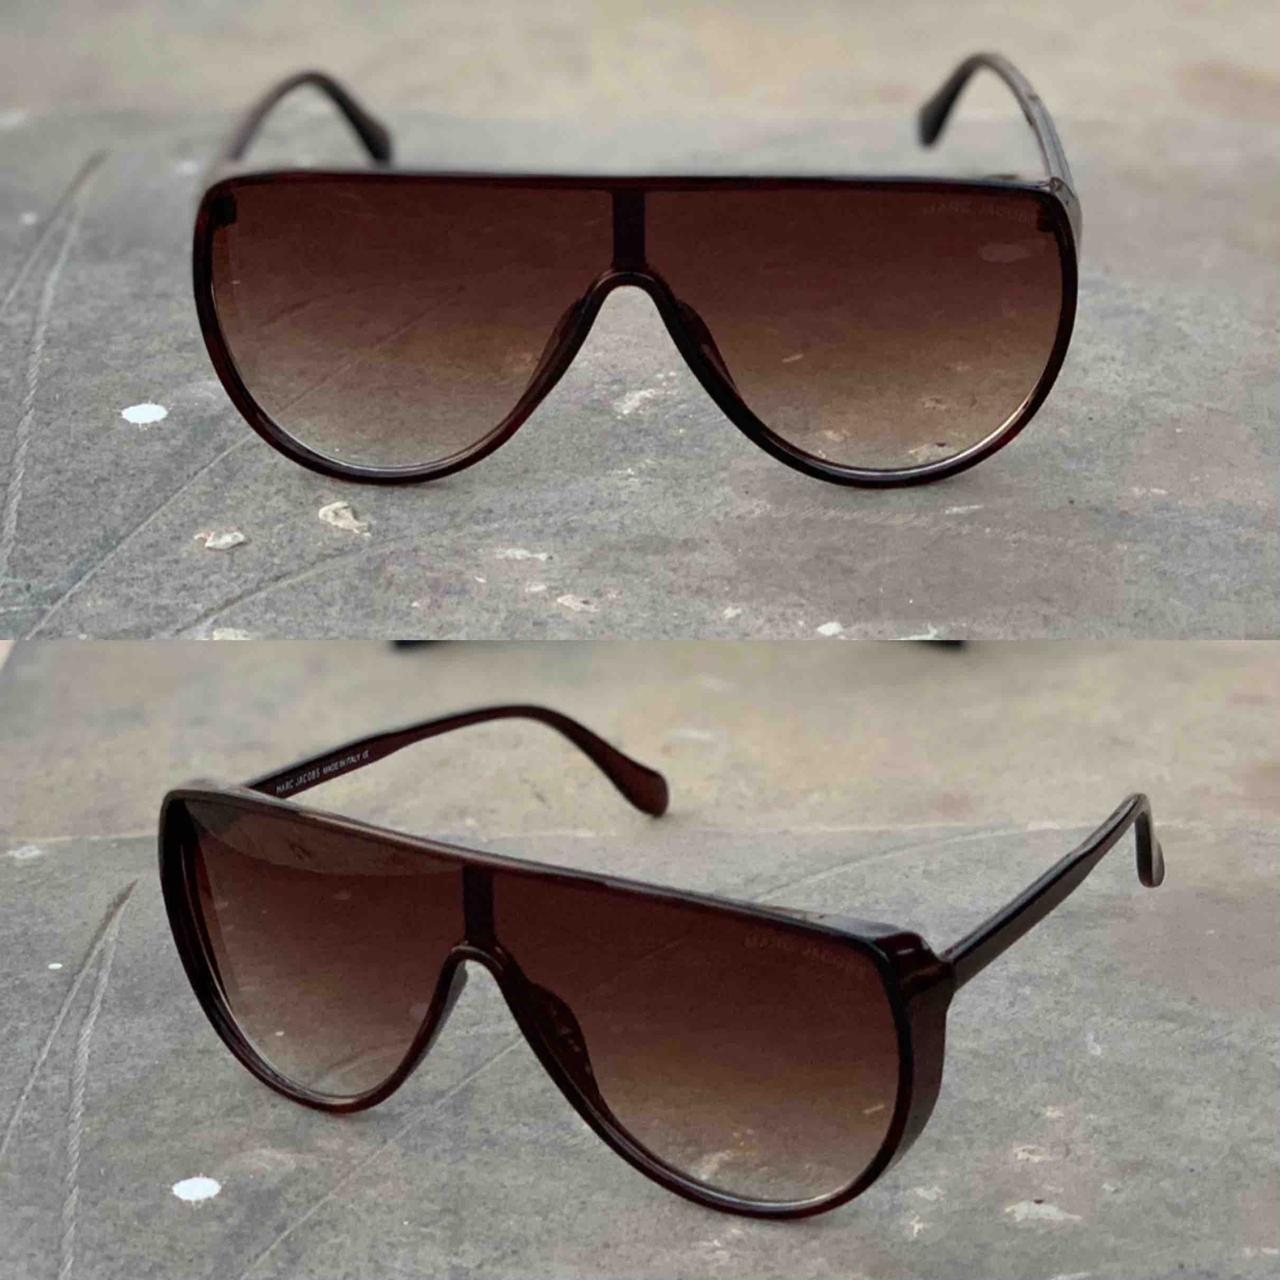 High Quality Oversized Sunglasses For Men And Women-Unique and Classy